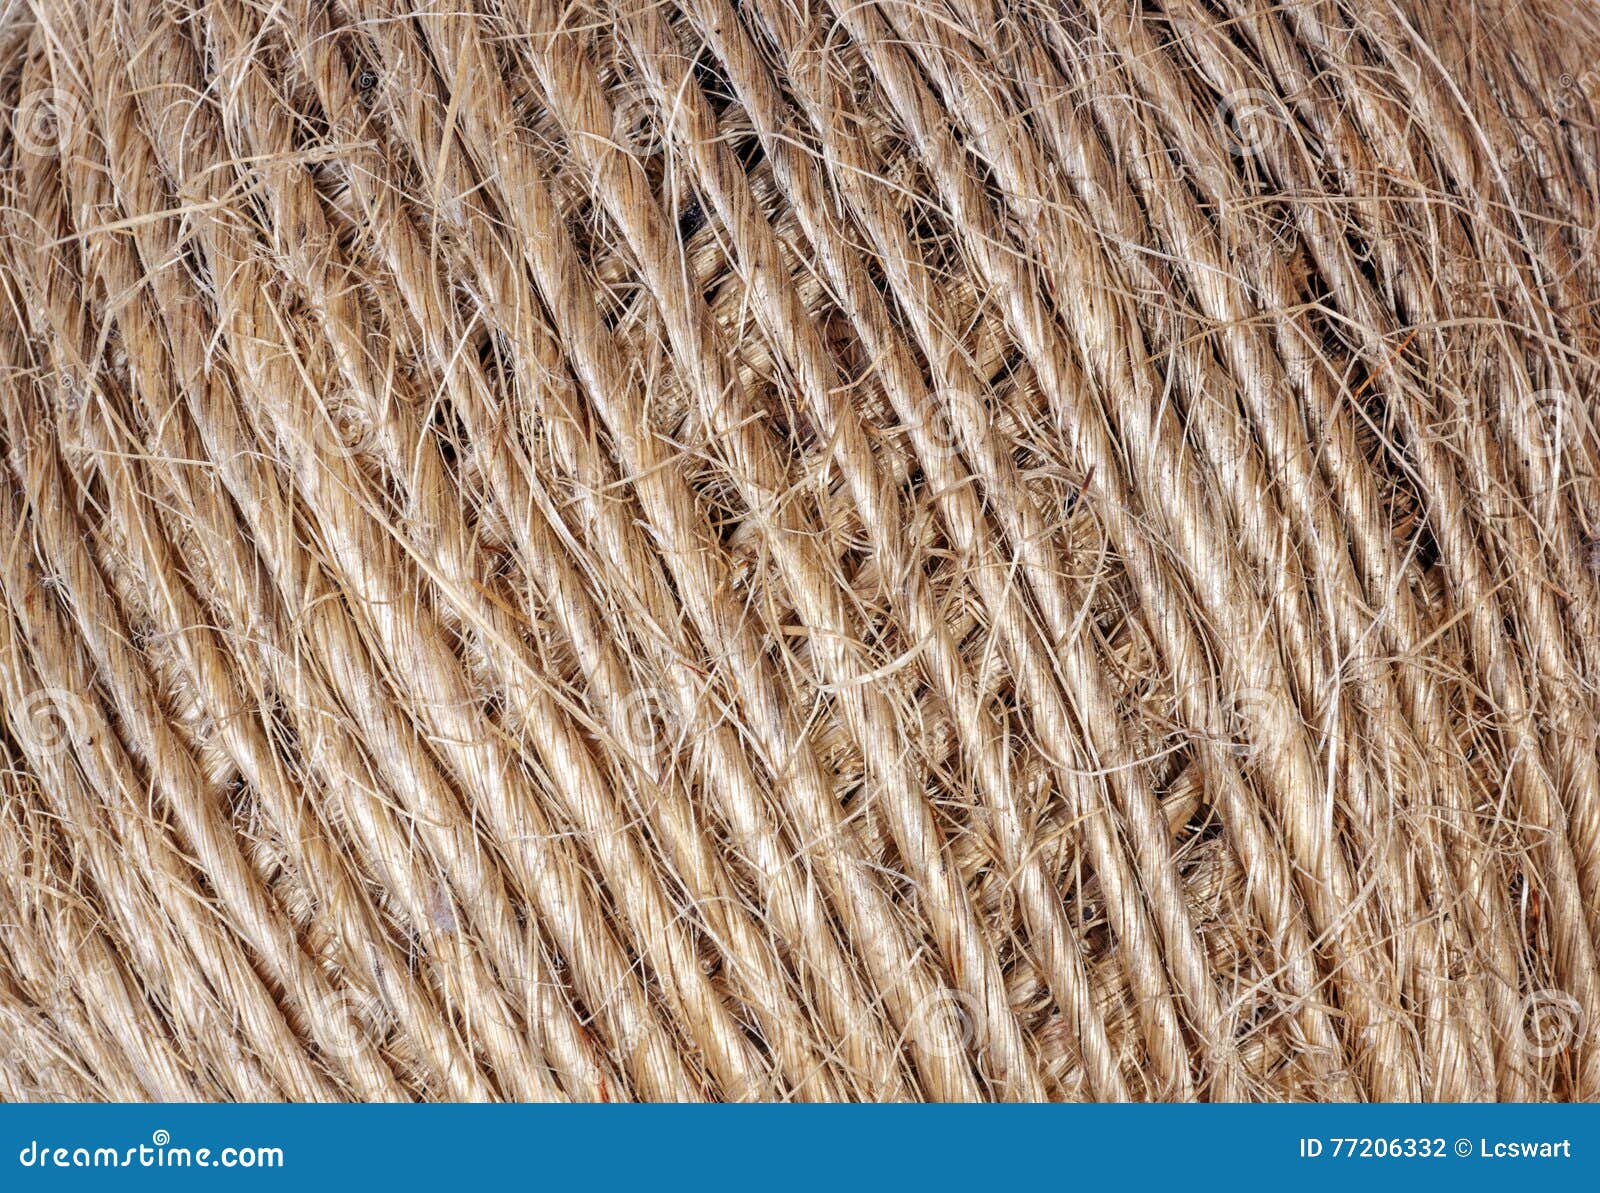 Patterns and Textures on Roll of String Twine Stock Photo - Image of  natural, spool: 77206332